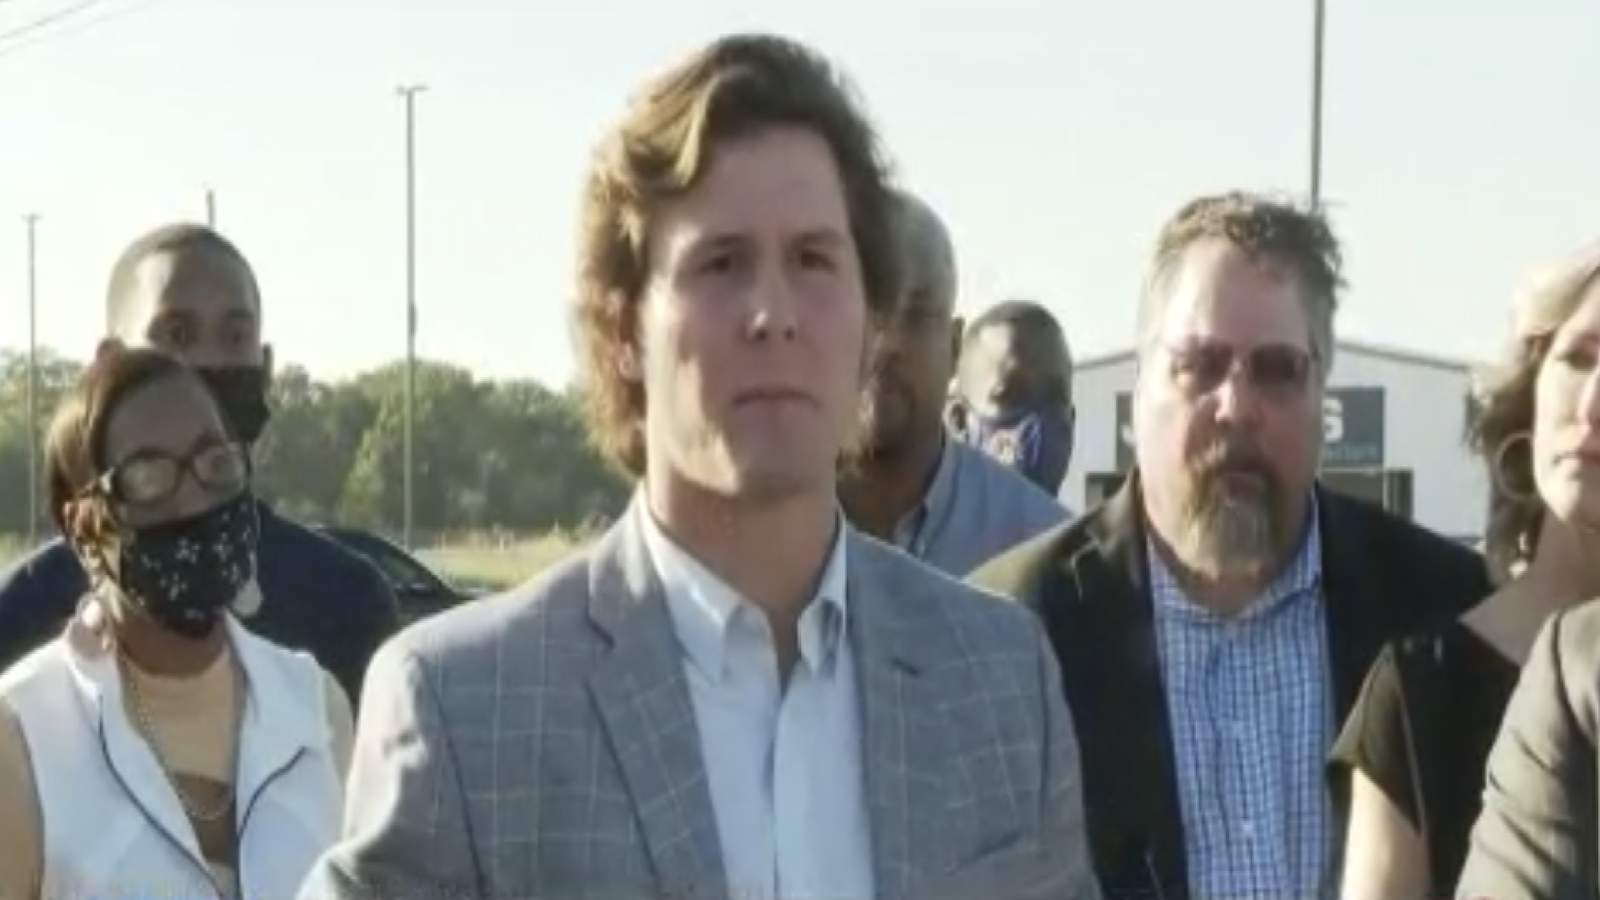 Katy High School football star kicked off team, now suing to be reinstated